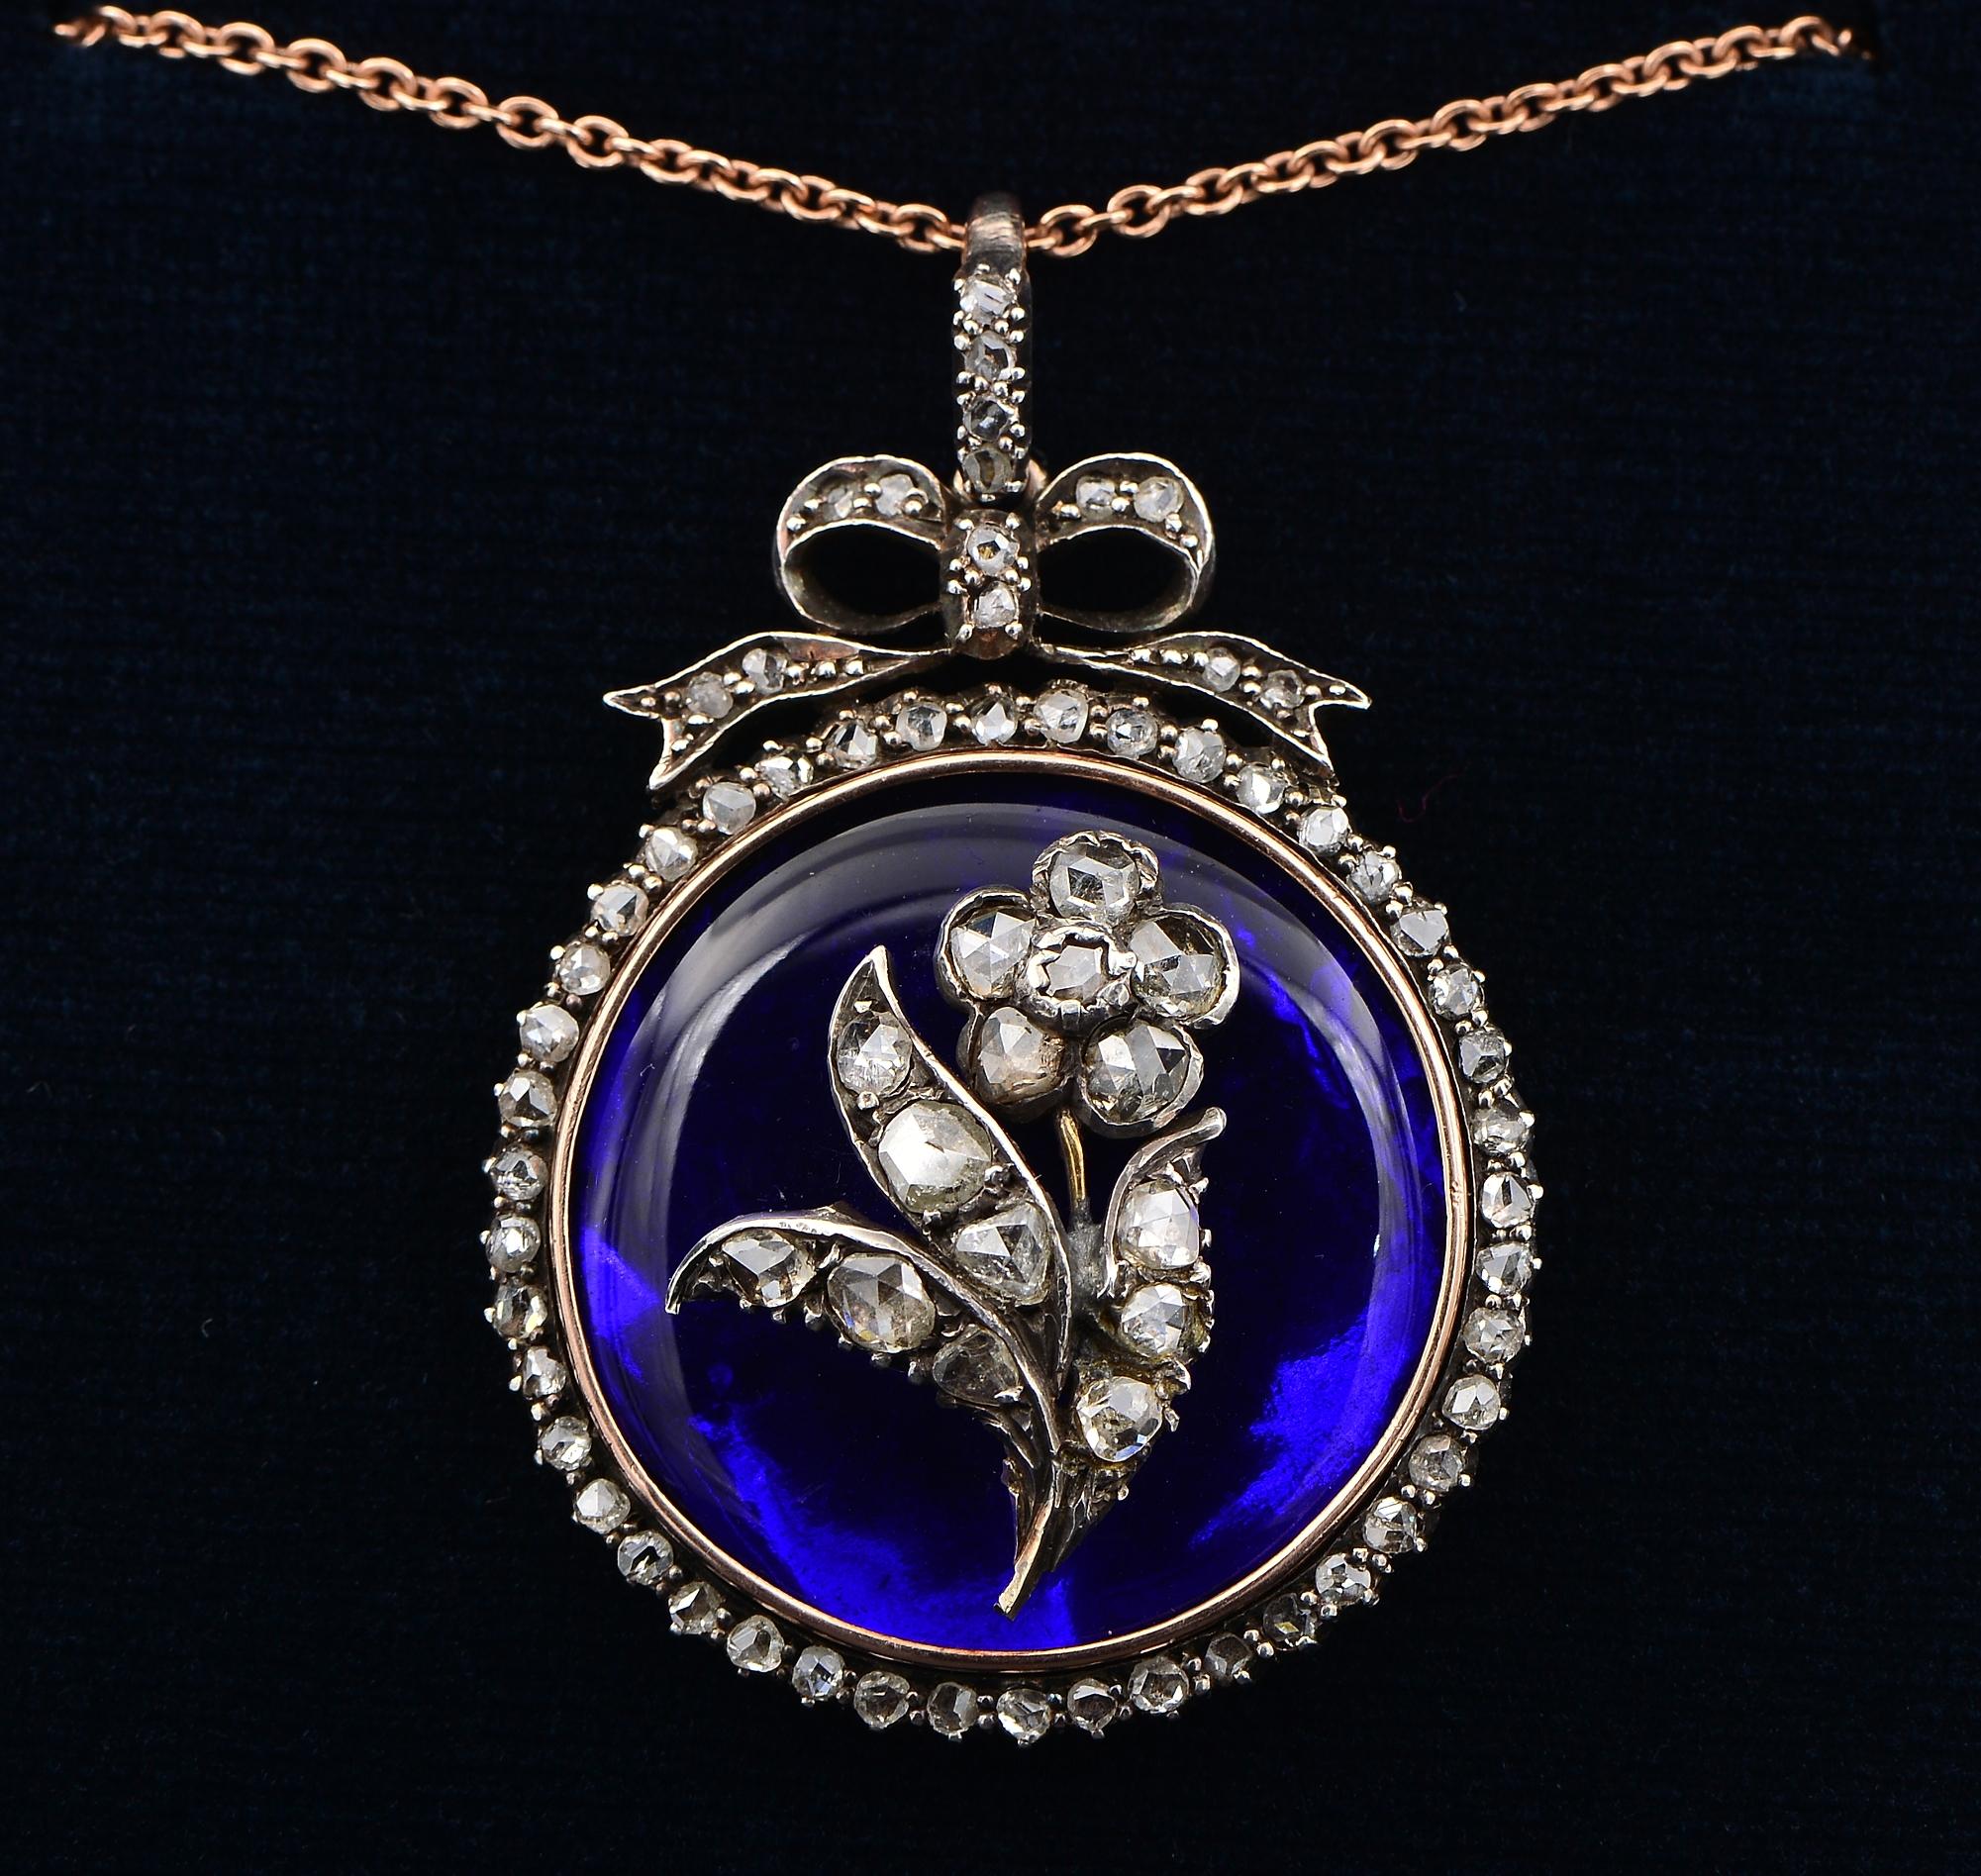 Past Treasure
This surprisingly beautiful antique pendant is Georgian period, 1790 ca
The large circular body is set with a rich Royal Cobalt Blue Bristol glass, encircled in gold within a border of rose cut Diamonds, surmounted by a lovely bow